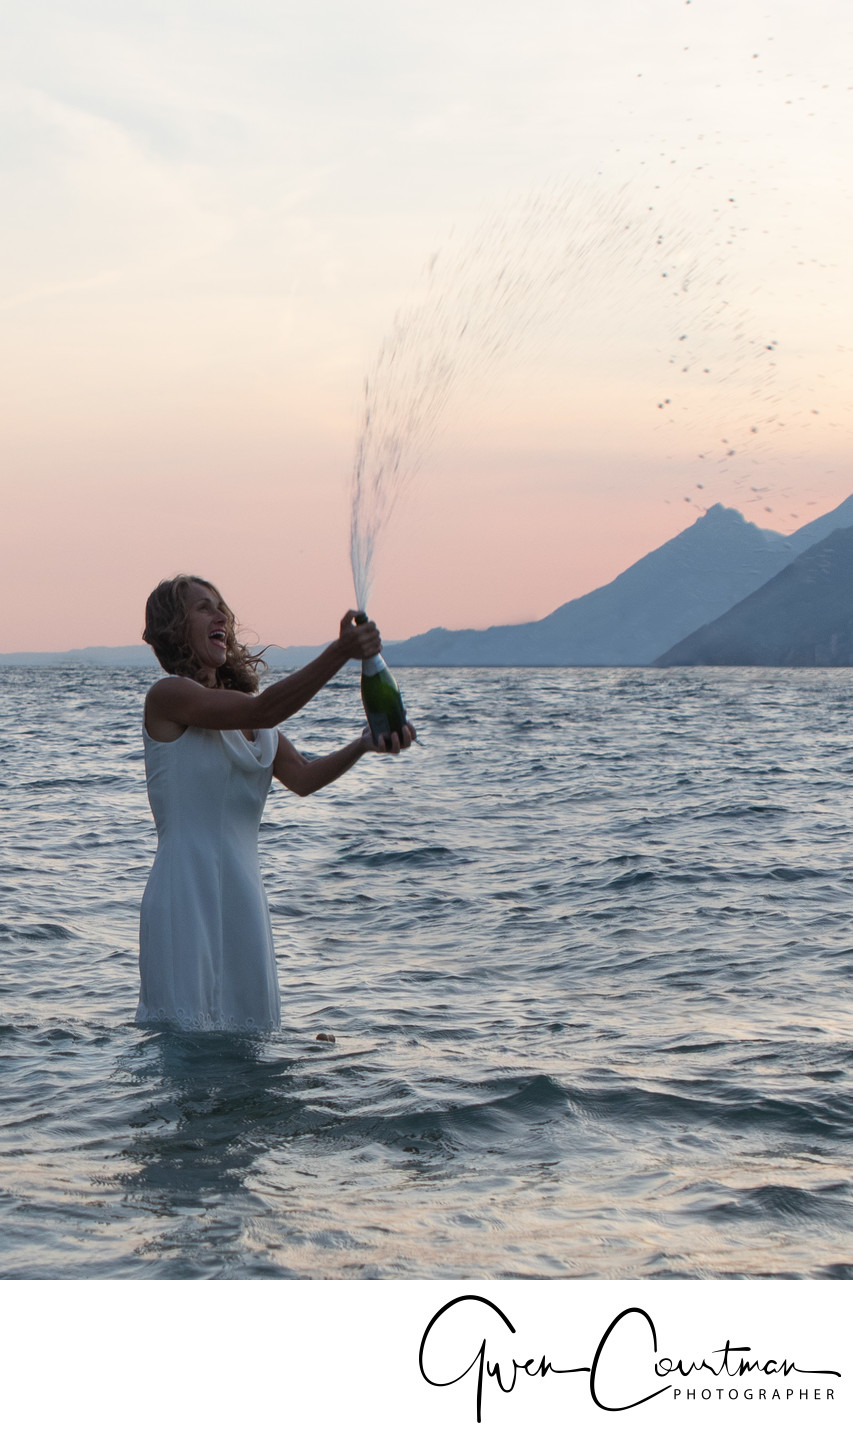 Prosecco in the water, Trash the dress Italy.